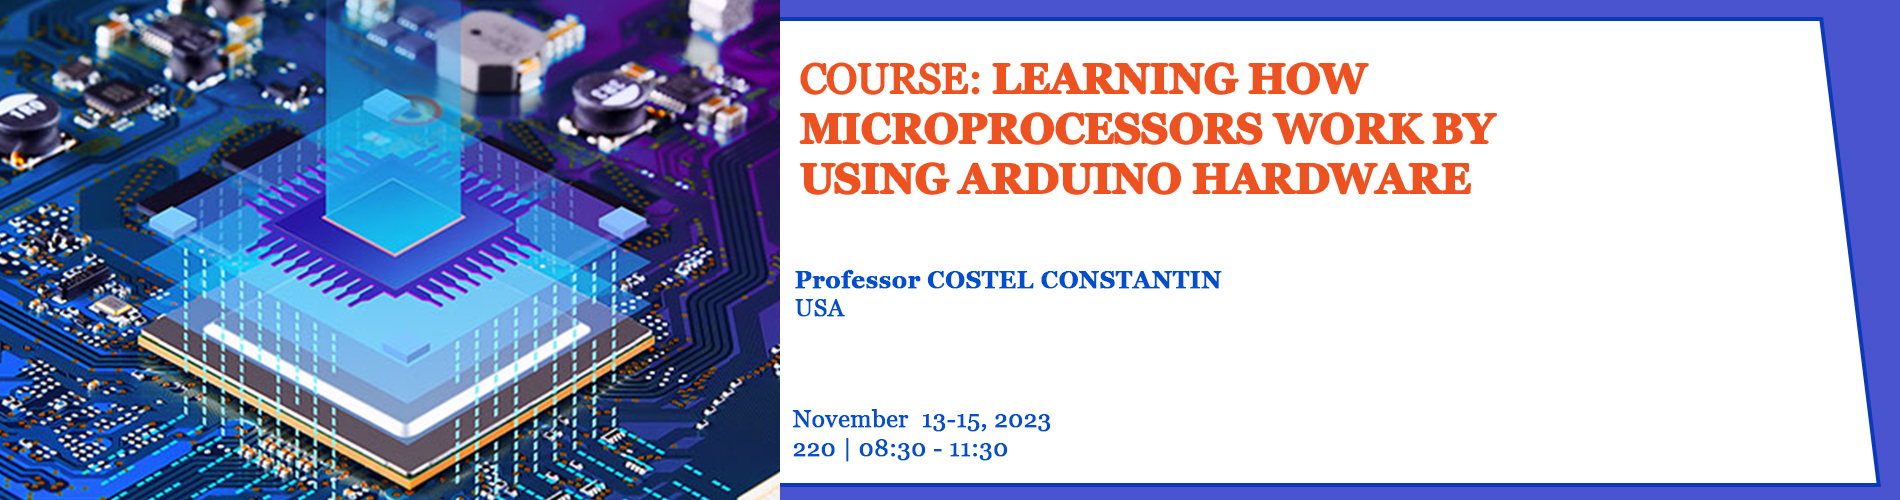 20231013-15_-_Learning_How_Microprocessors_Work_by_Using_Arduino_Hardware